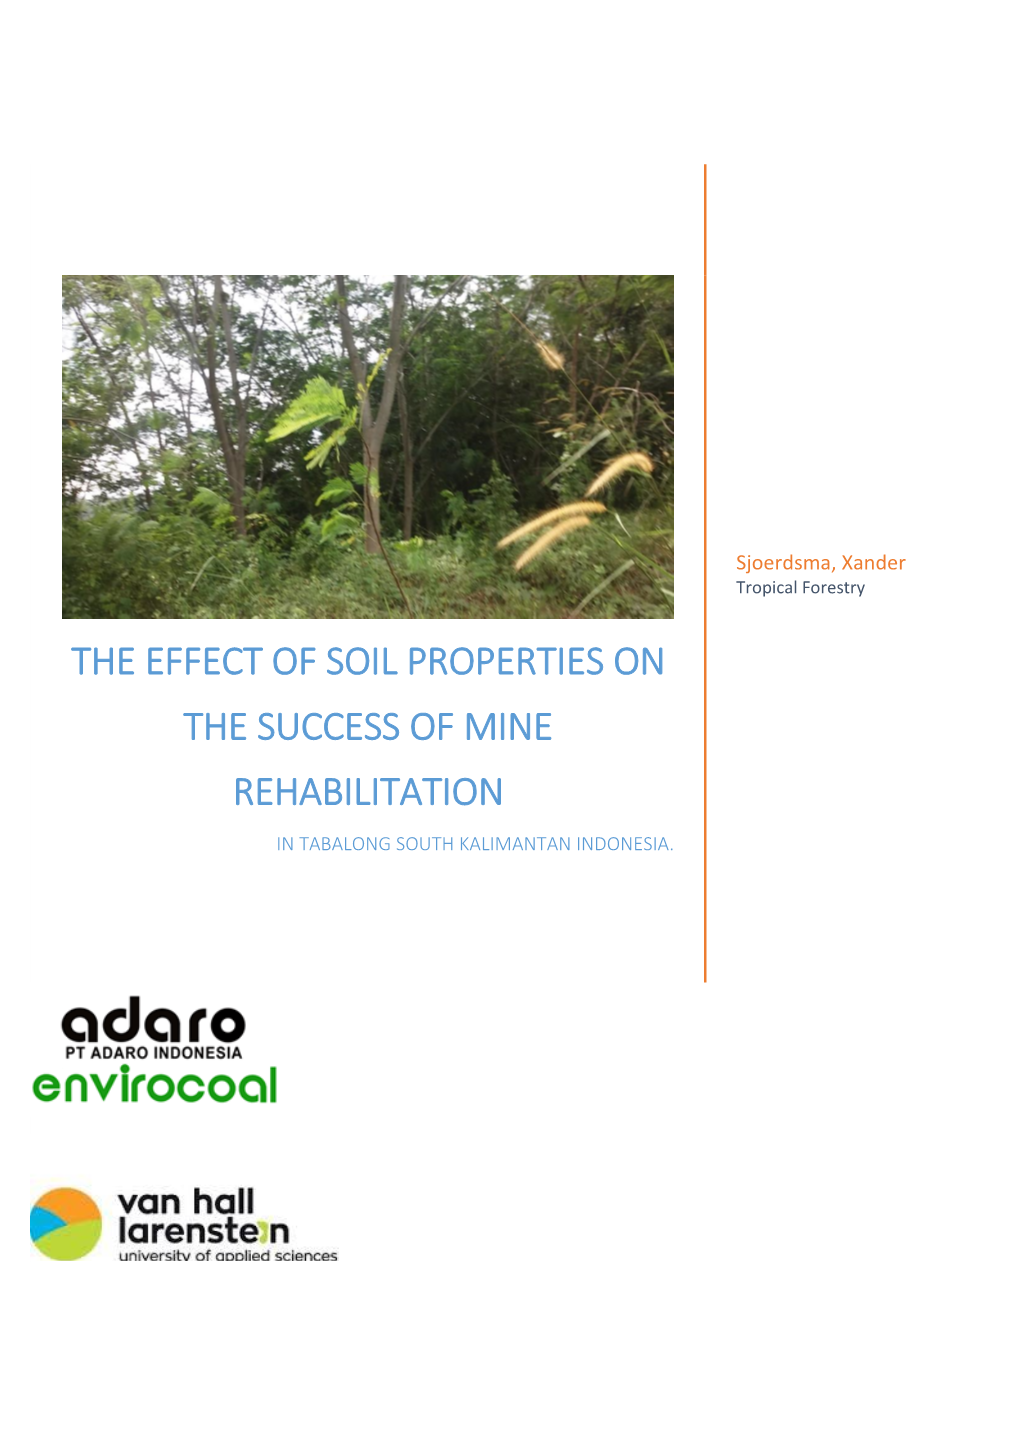 The Effect of Soil Properties on the Success of Mine Rehabilitation in Tabalong South Kalimantan Indonesia